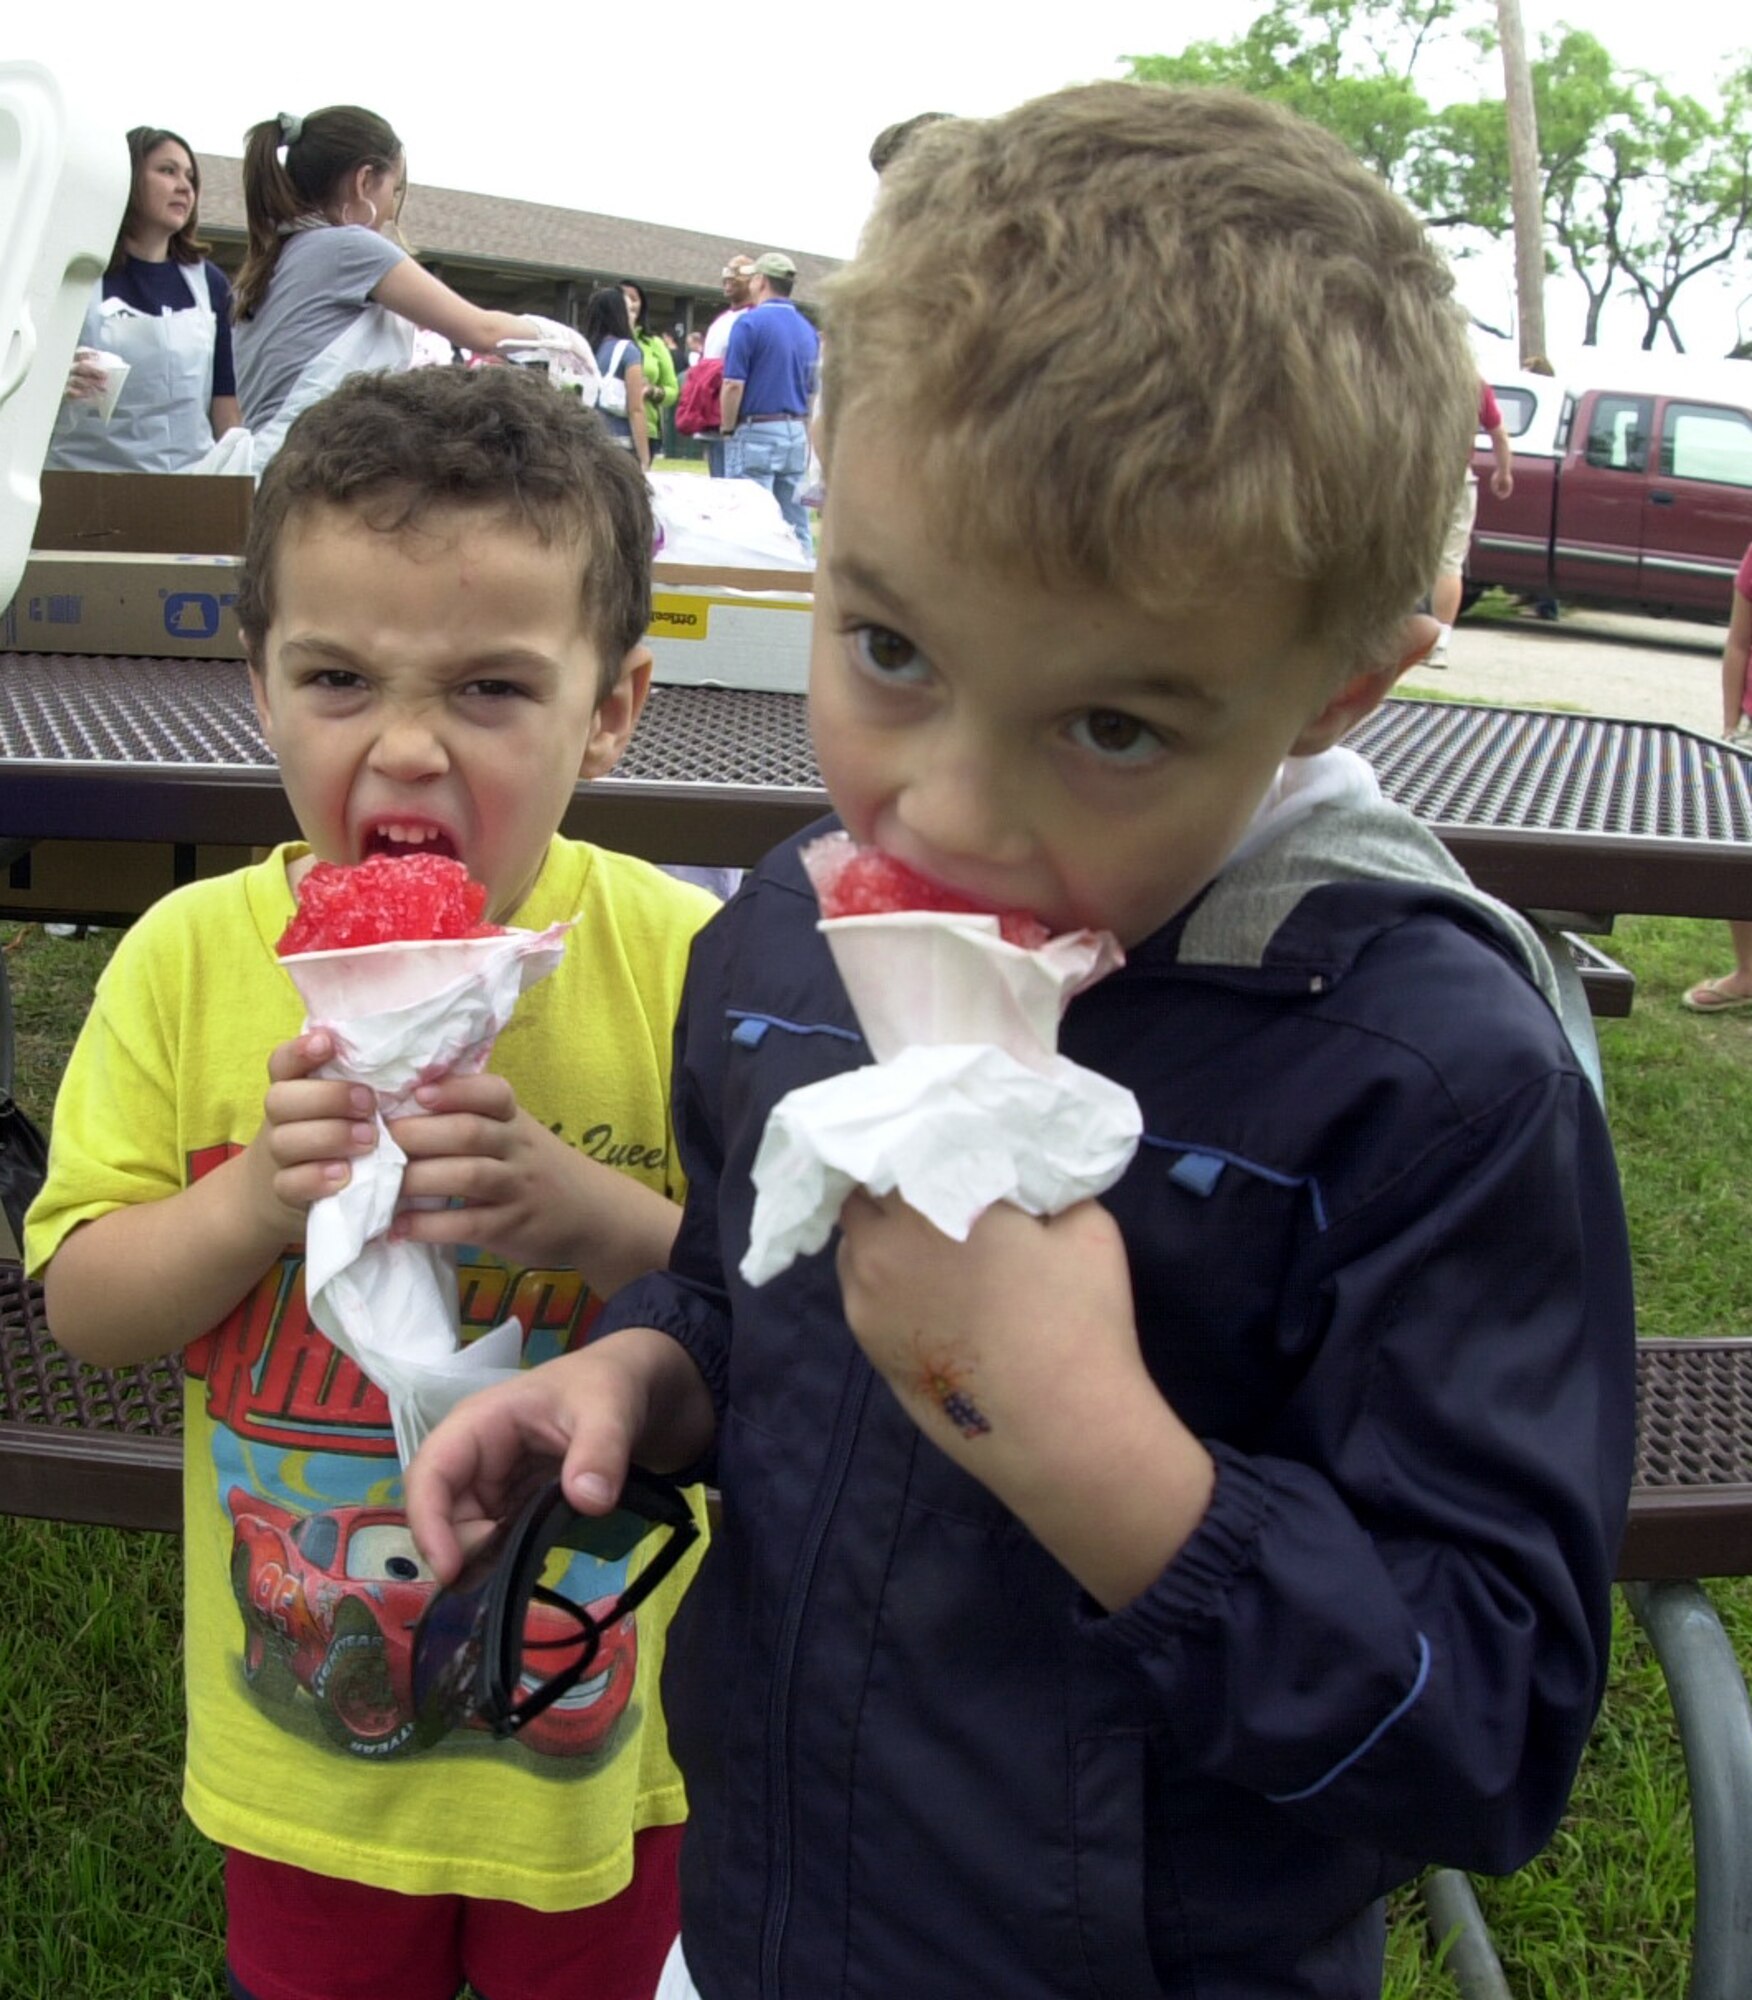 Four-year-old Matthew Baker and his six-year-old brother Michael take big bites of the free strawberry snow cones at the Goodfellow Appreciation Day picnic May 19. (U.S. Air Force photo by Airman 1st Class Luis Loza Gutierrez)